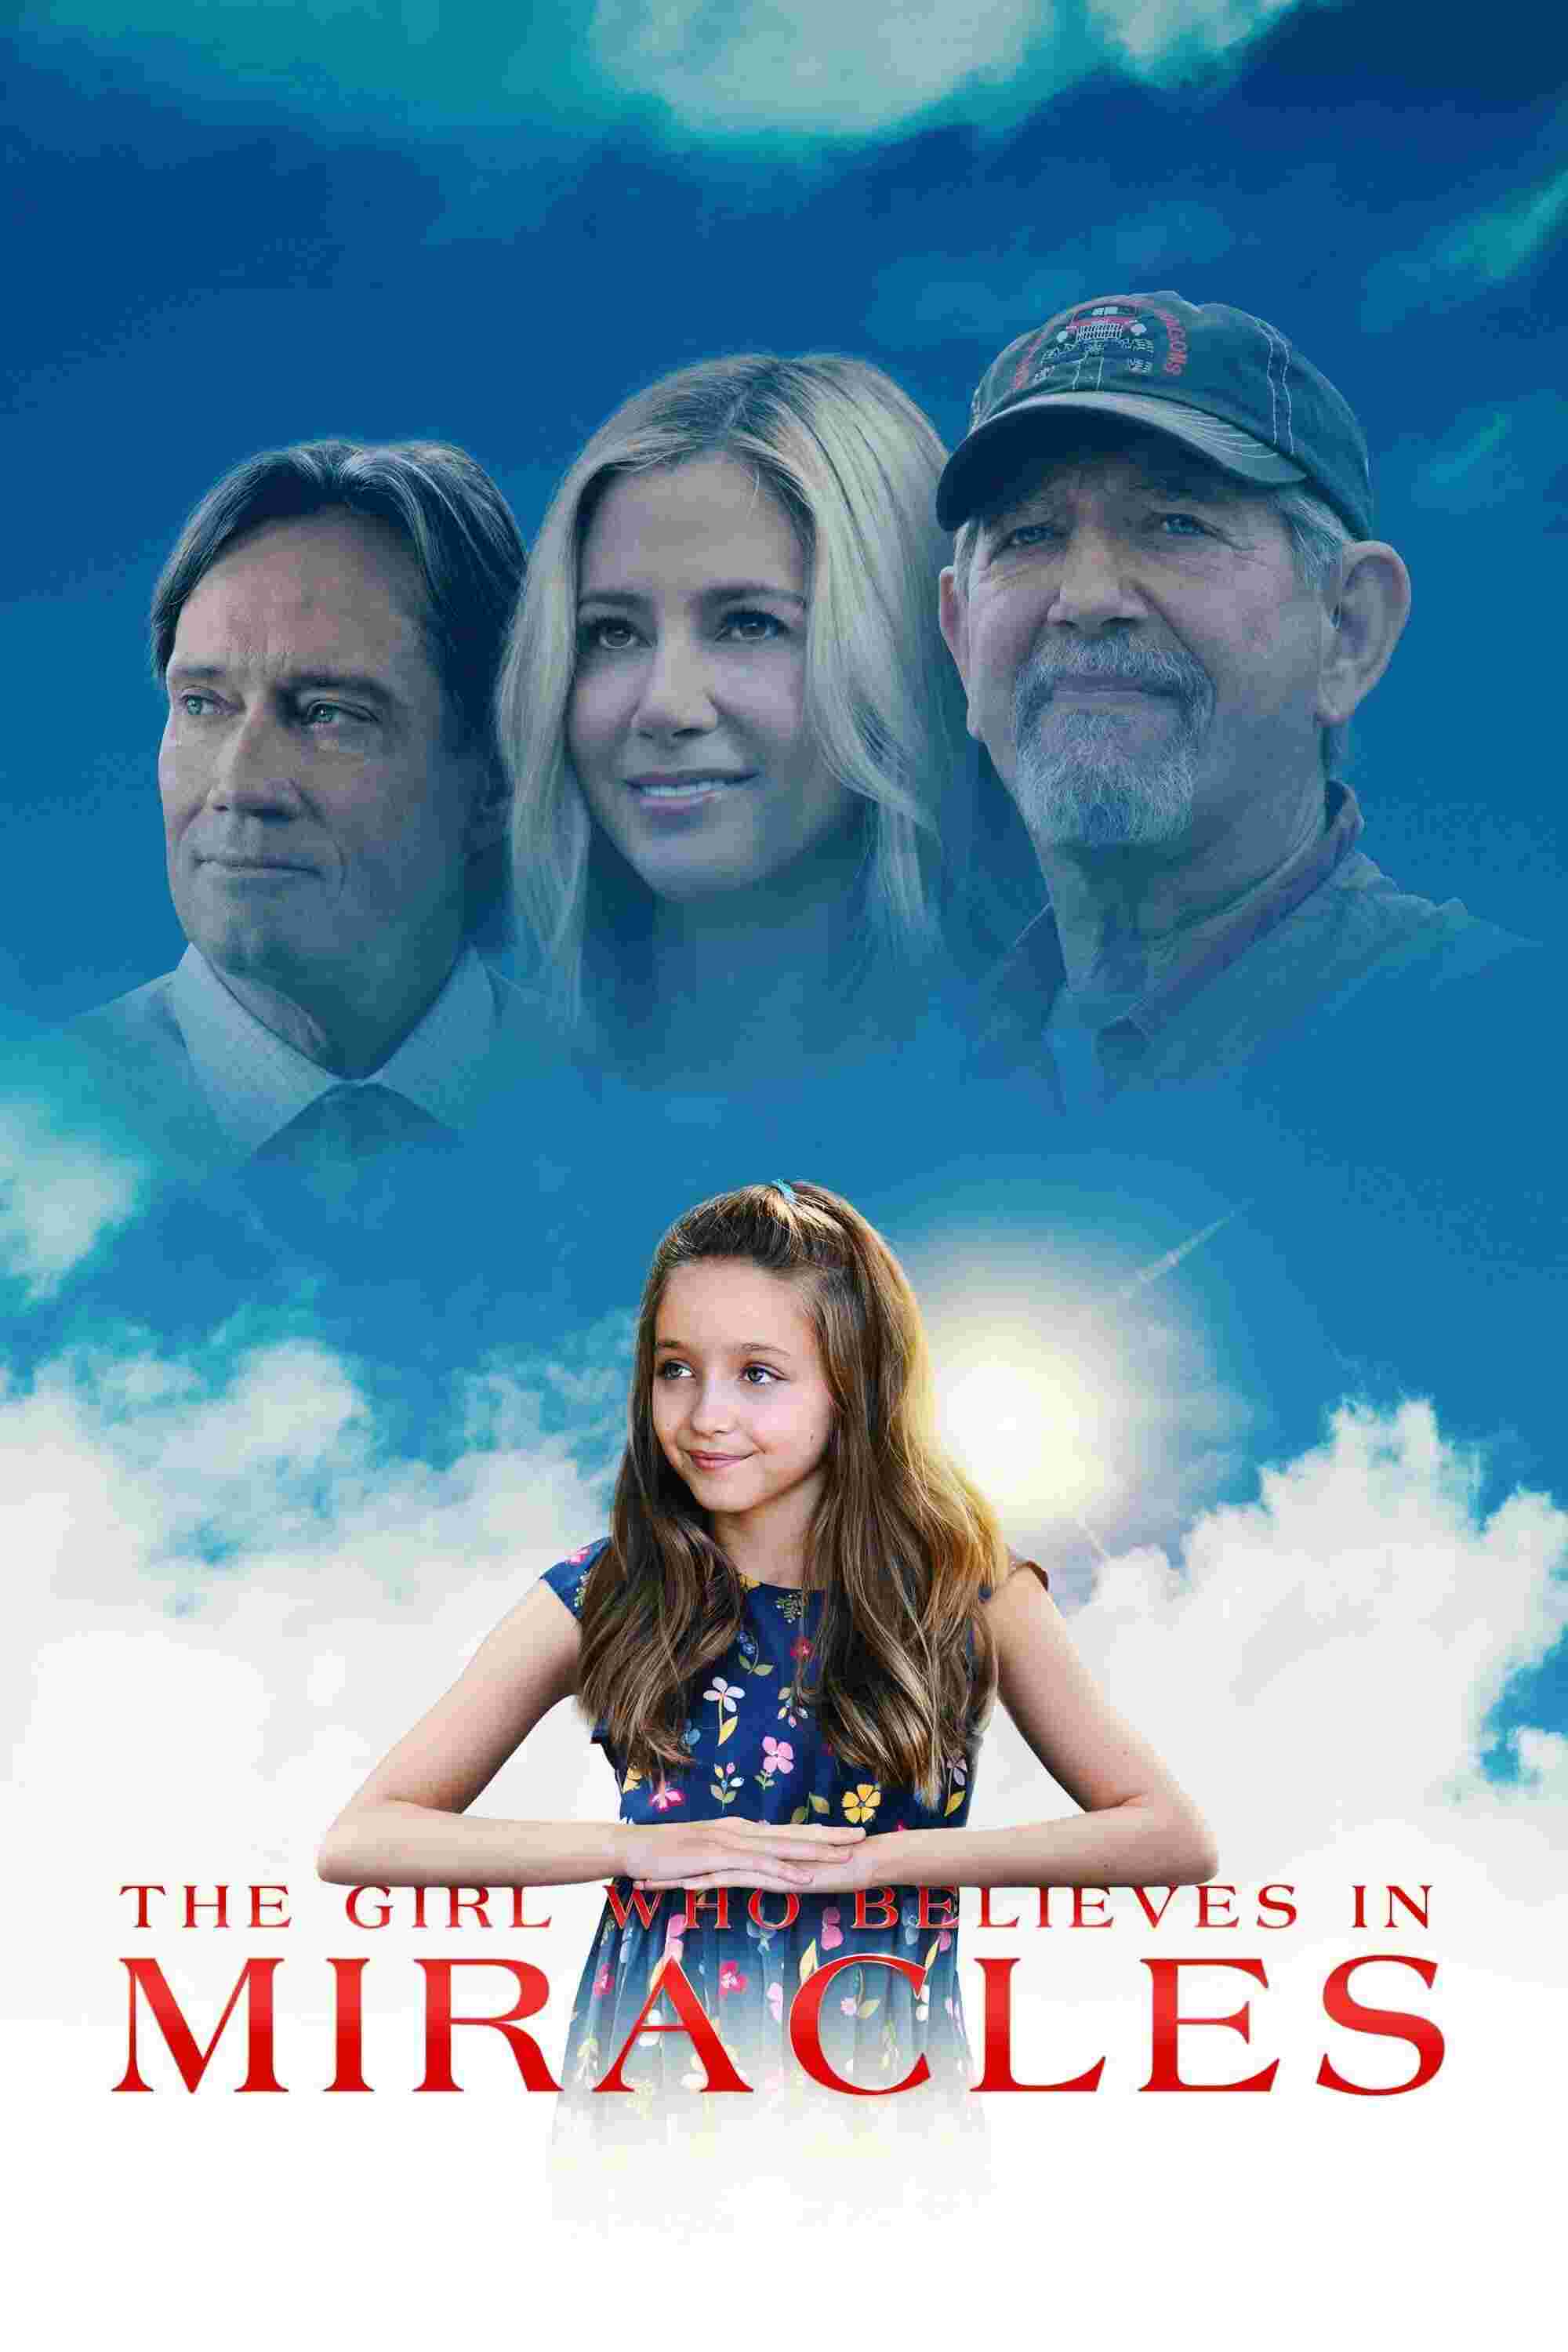 The Girl Who Believes in Miracles (2021) Mira Sorvino